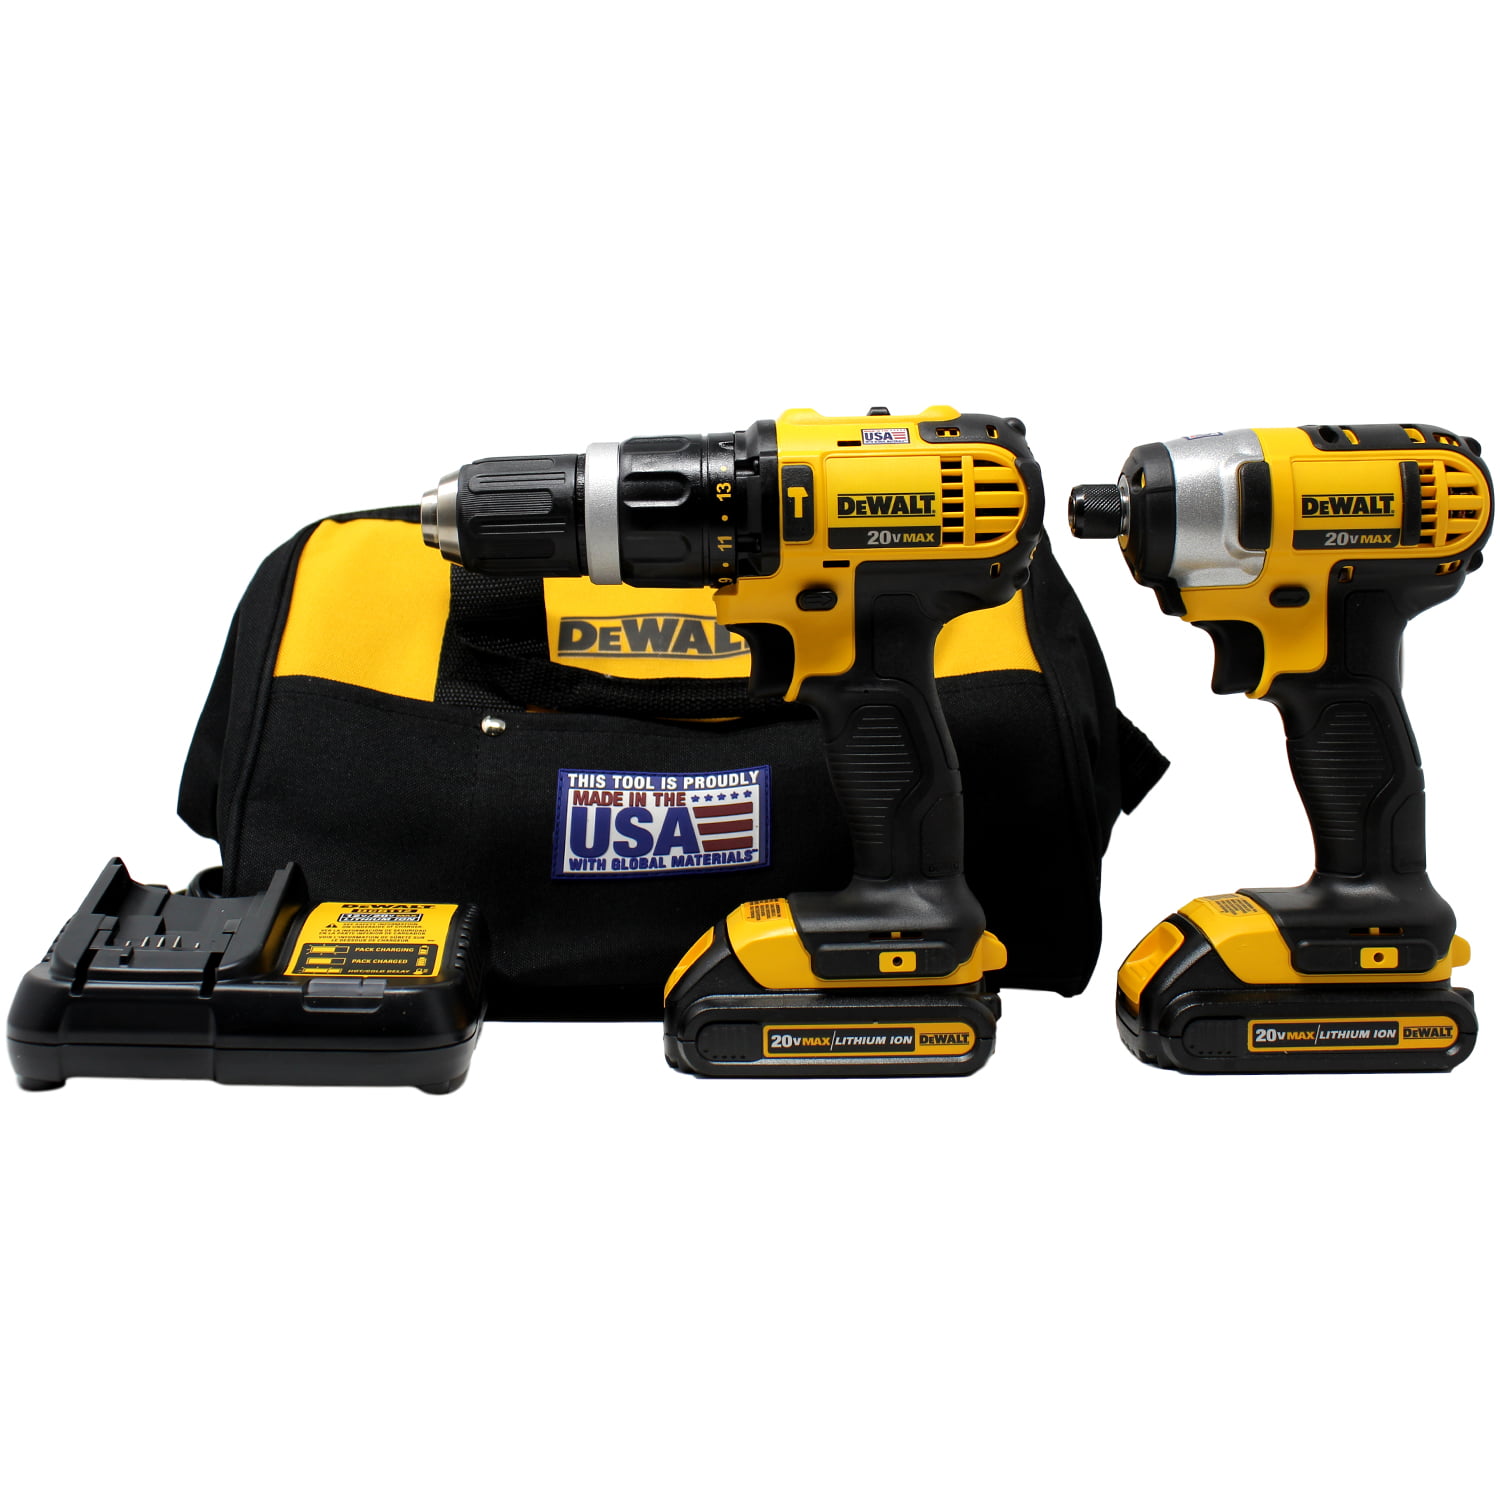 DeWALT 20V Max Compact Hammer Drill  Impact Driver Cordless Combo Kit with  (2) 20 Volt 1.5 Ah Lithium-Ion Batteries, Charger  Contractor Bag 